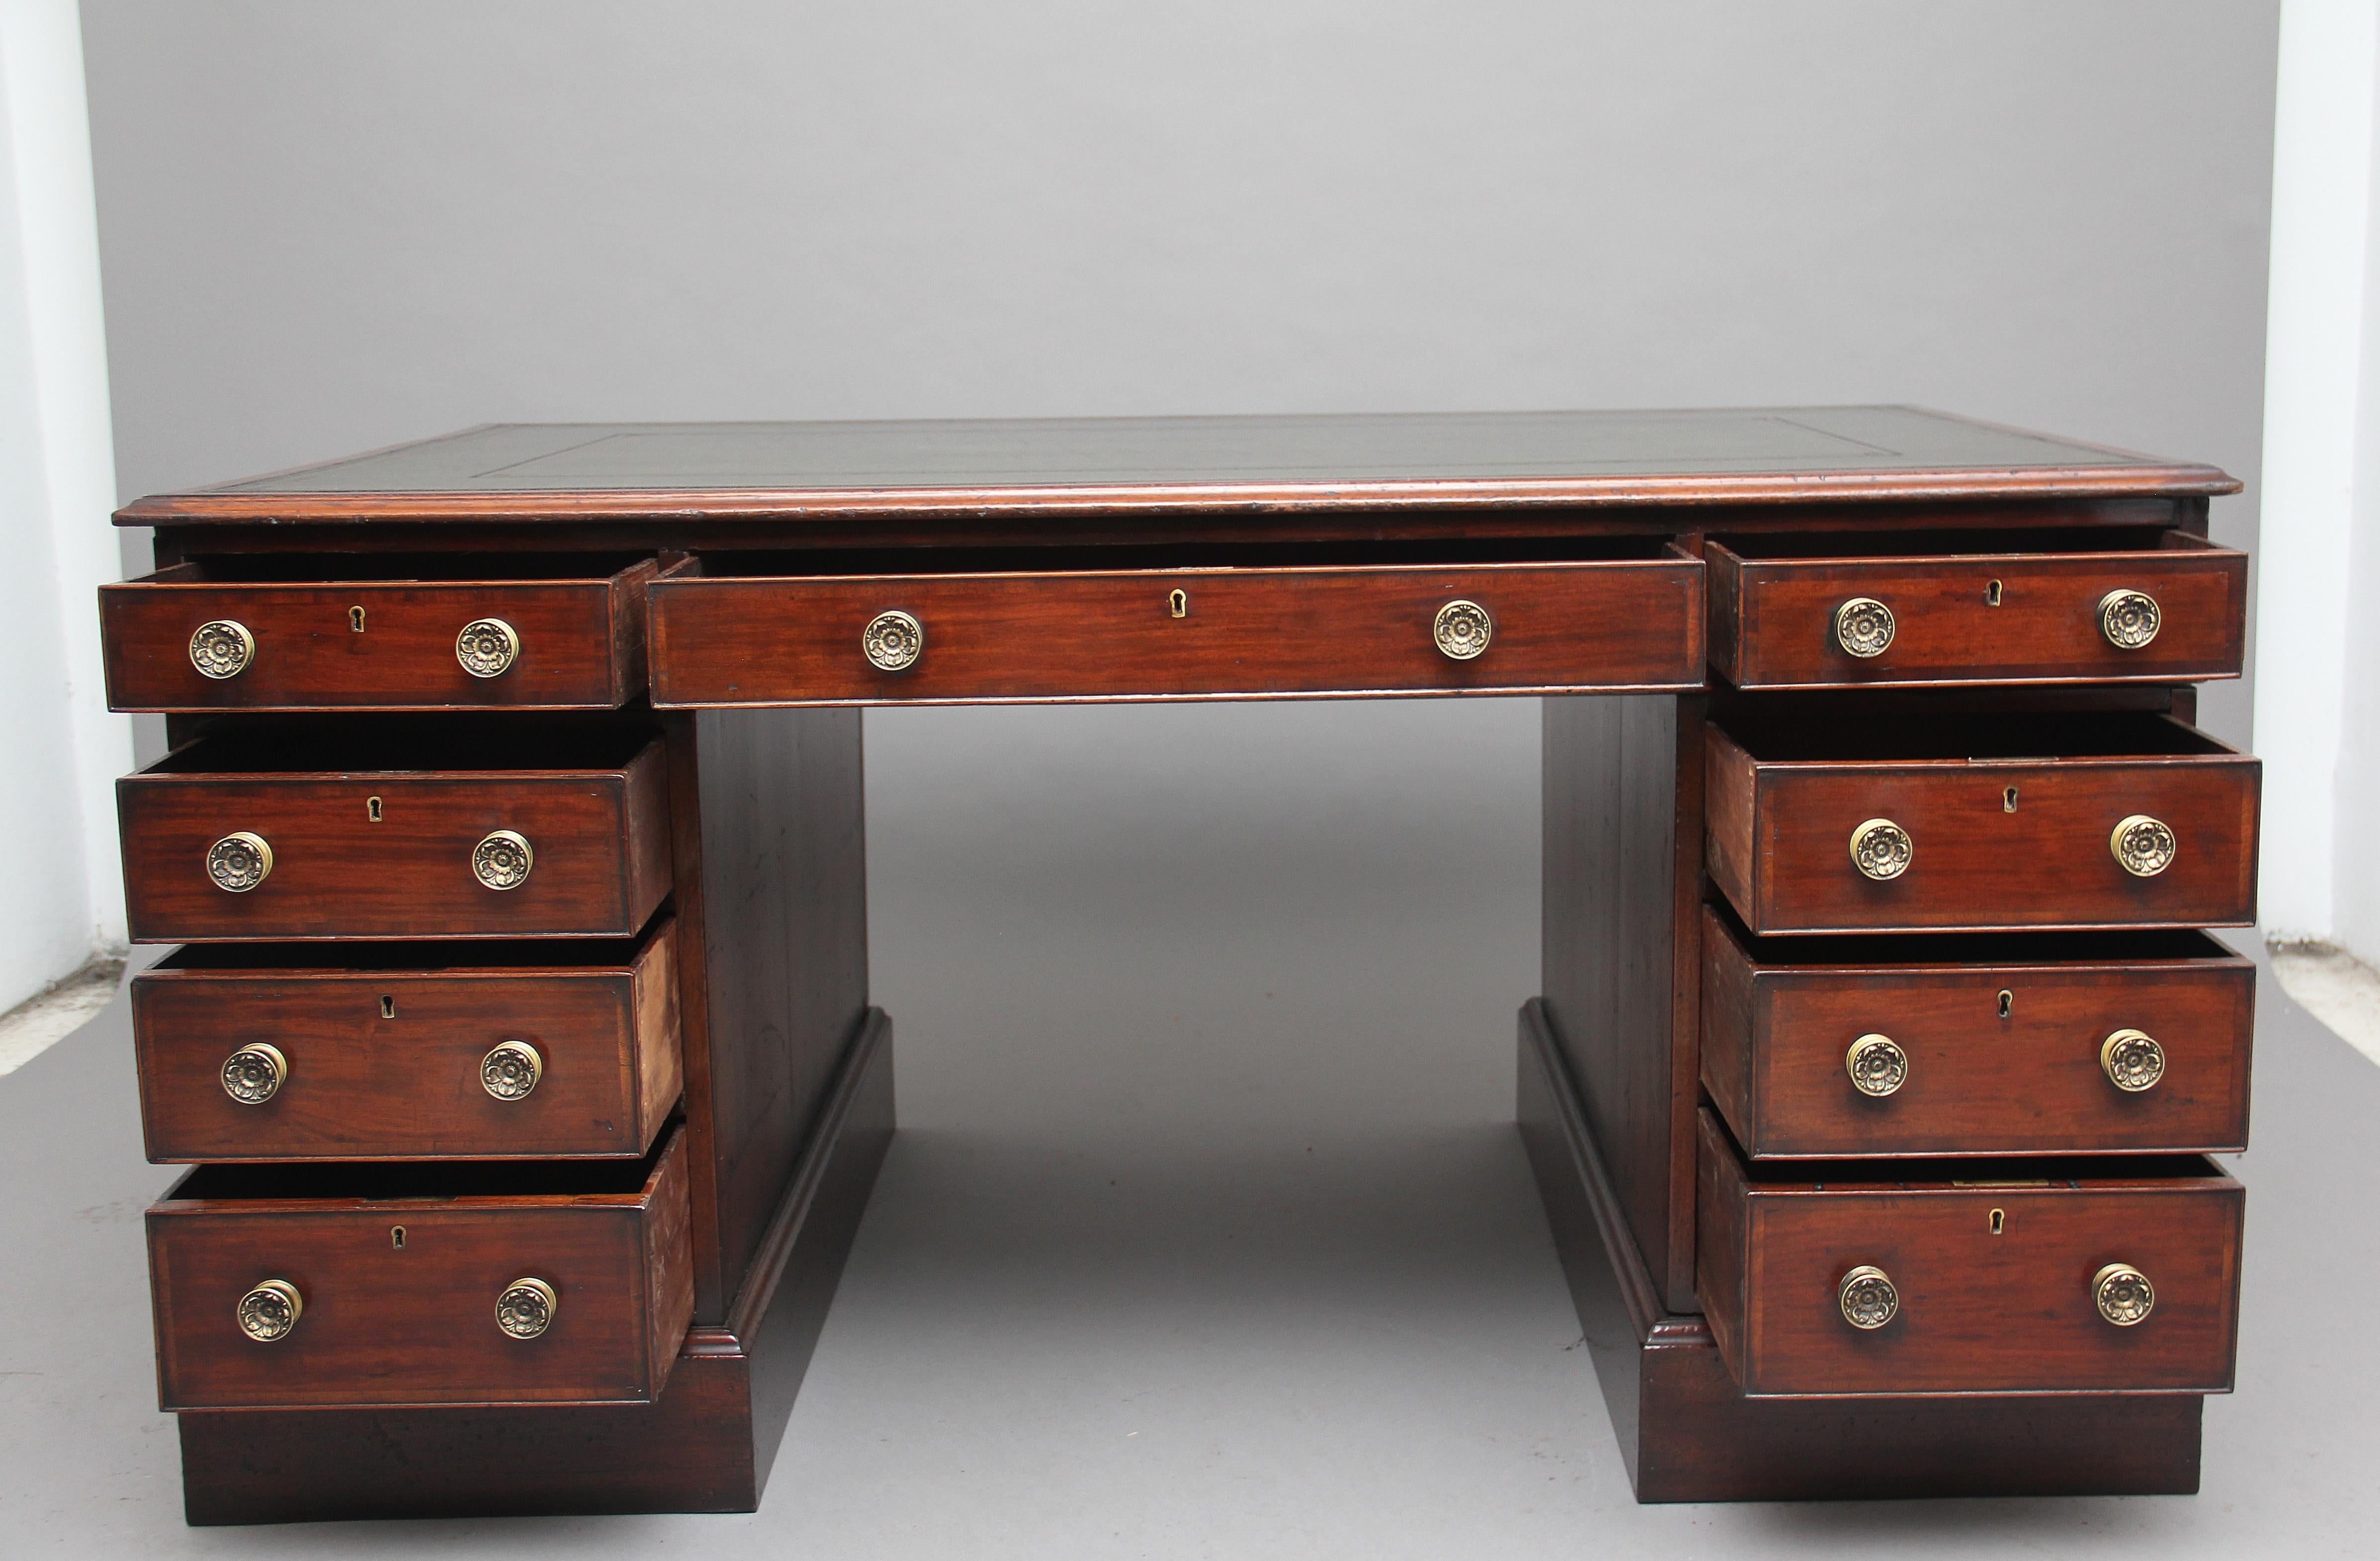 A good quality early 19th century mahogany twin pedestal partners desk, the moulded edge top having a green leather writing surface decorated with gold and blind tooling, the front of the desk having an arrangement of nine graduated, mahogany lined